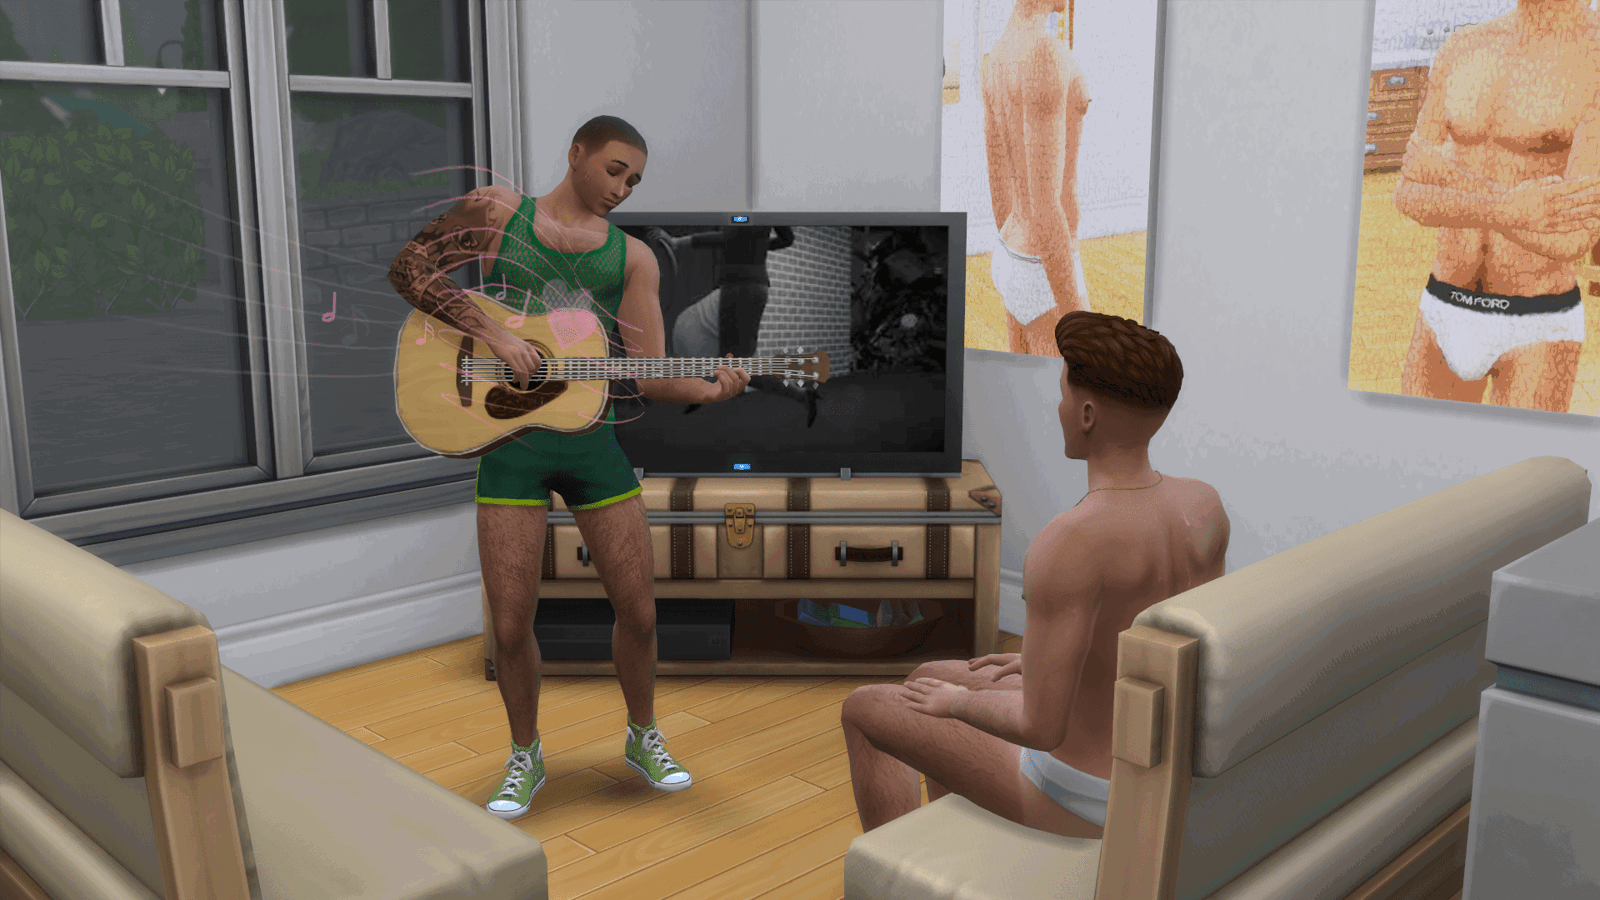 Photo by Sims4Men with the username @Sims4Men, who is a verified user,  December 2, 2021 at 3:24 PM and the text says 'My Men of Sims 4'